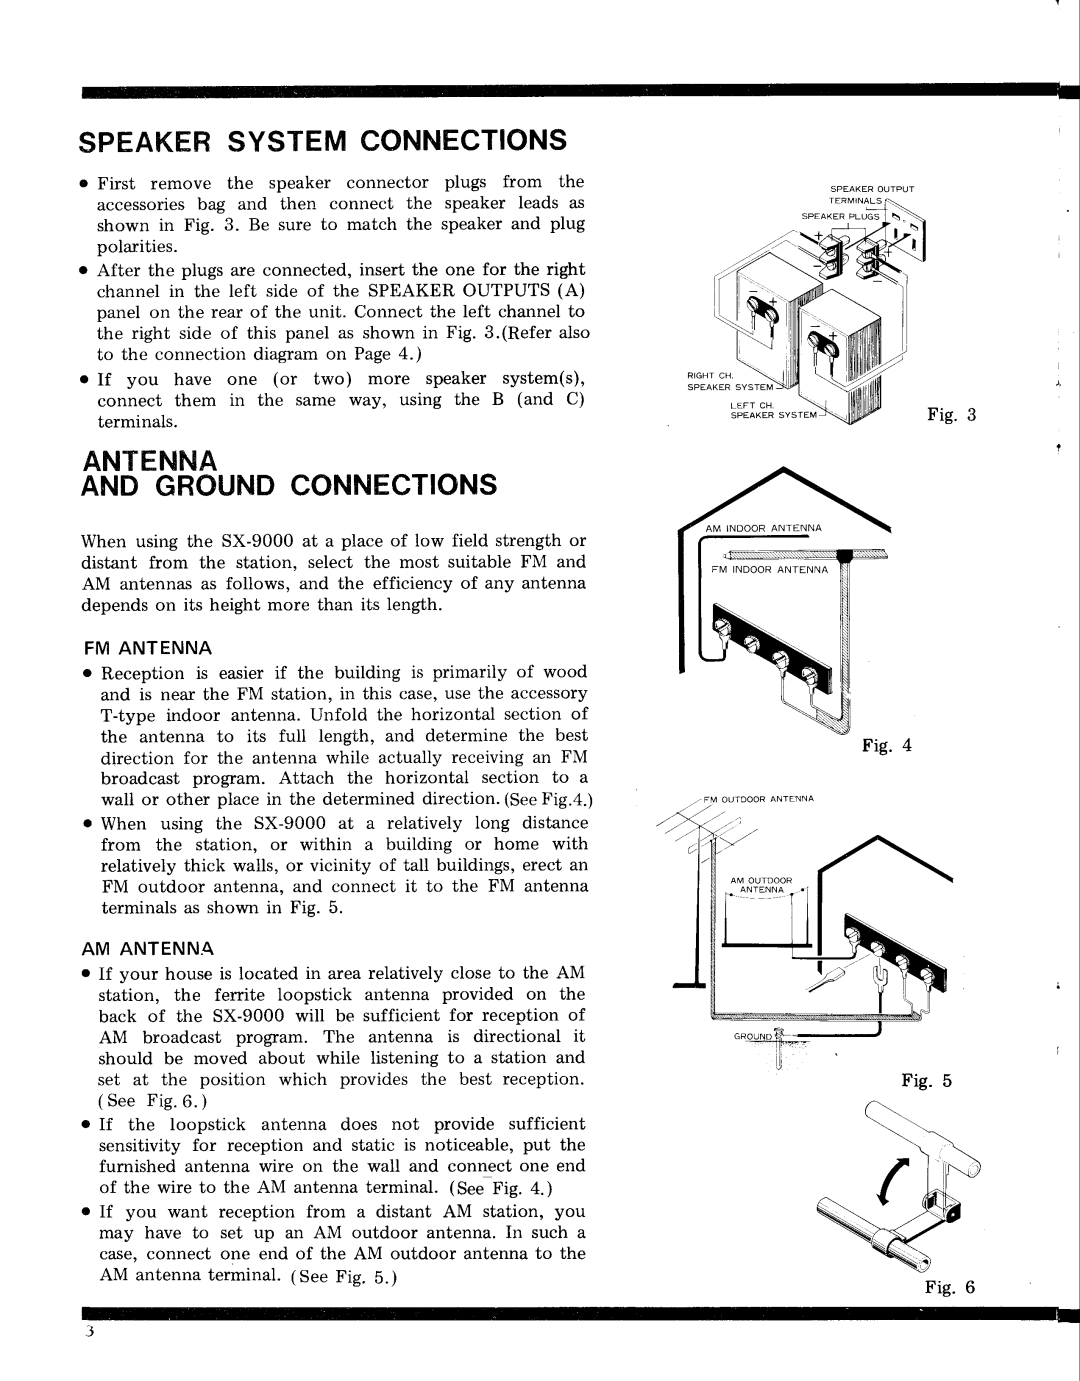 Pioneer SX-9000 service manual Speakhrsystemconnections, Antenna And Groundconnections 